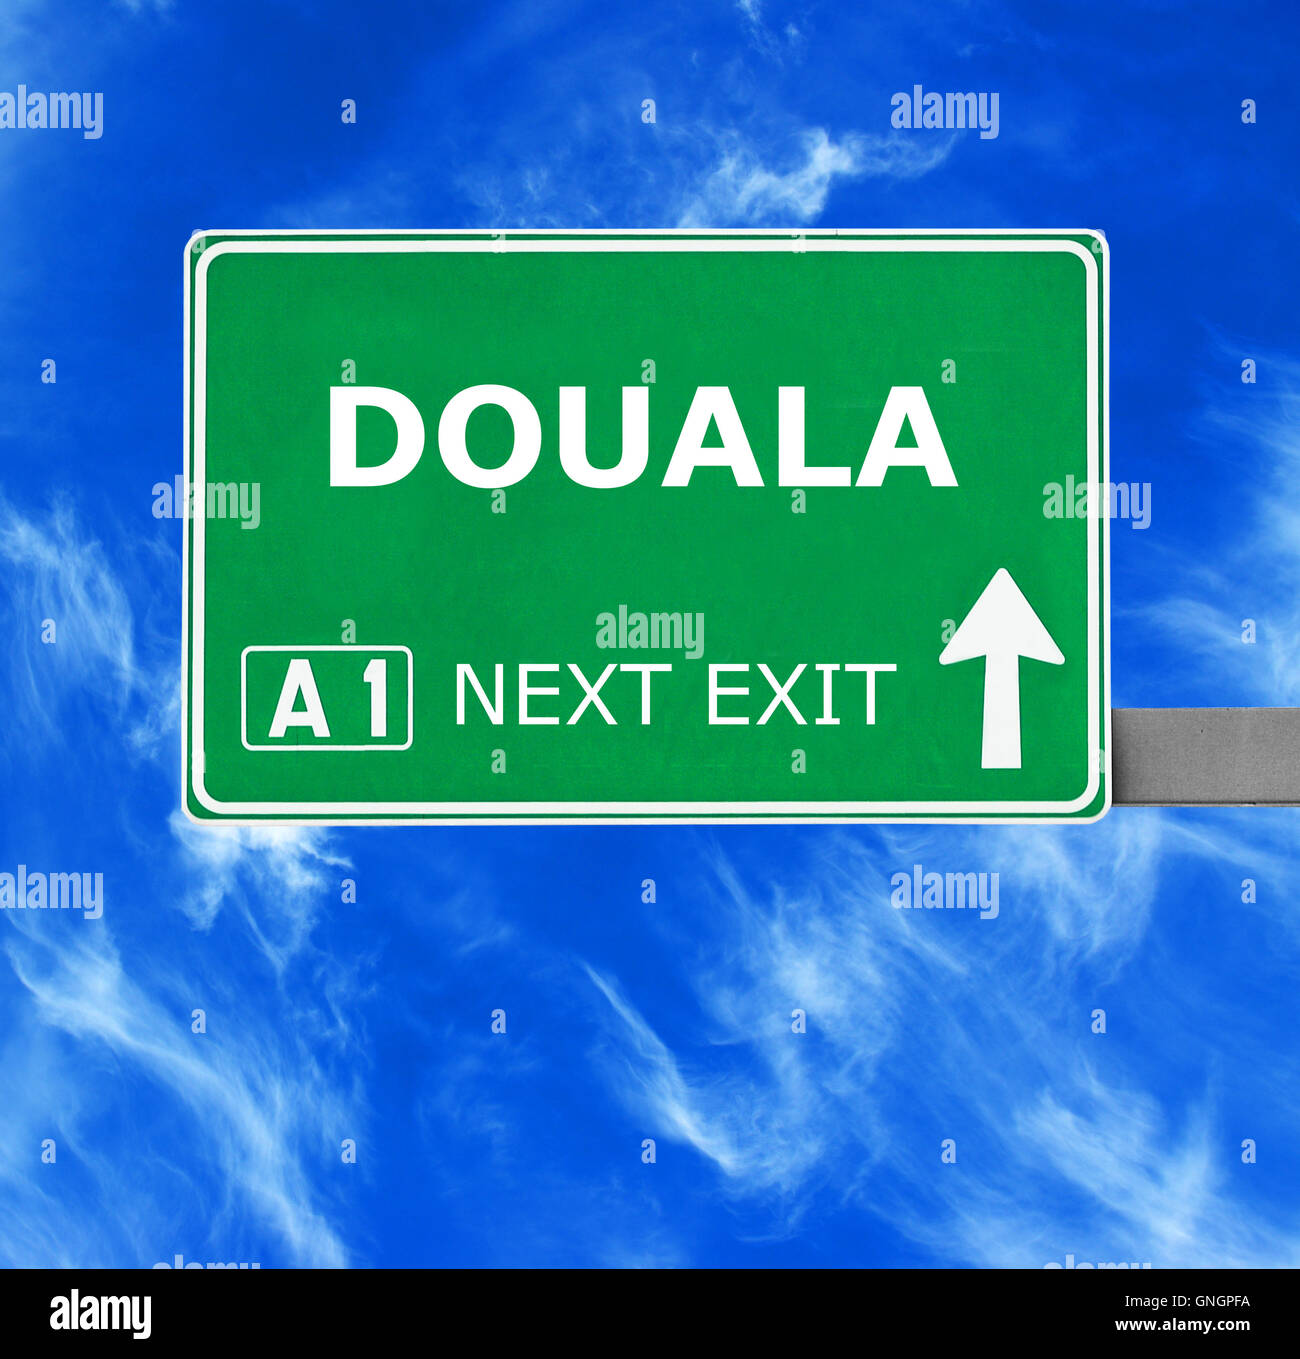 DOUALA road sign against clear blue sky Stock Photo